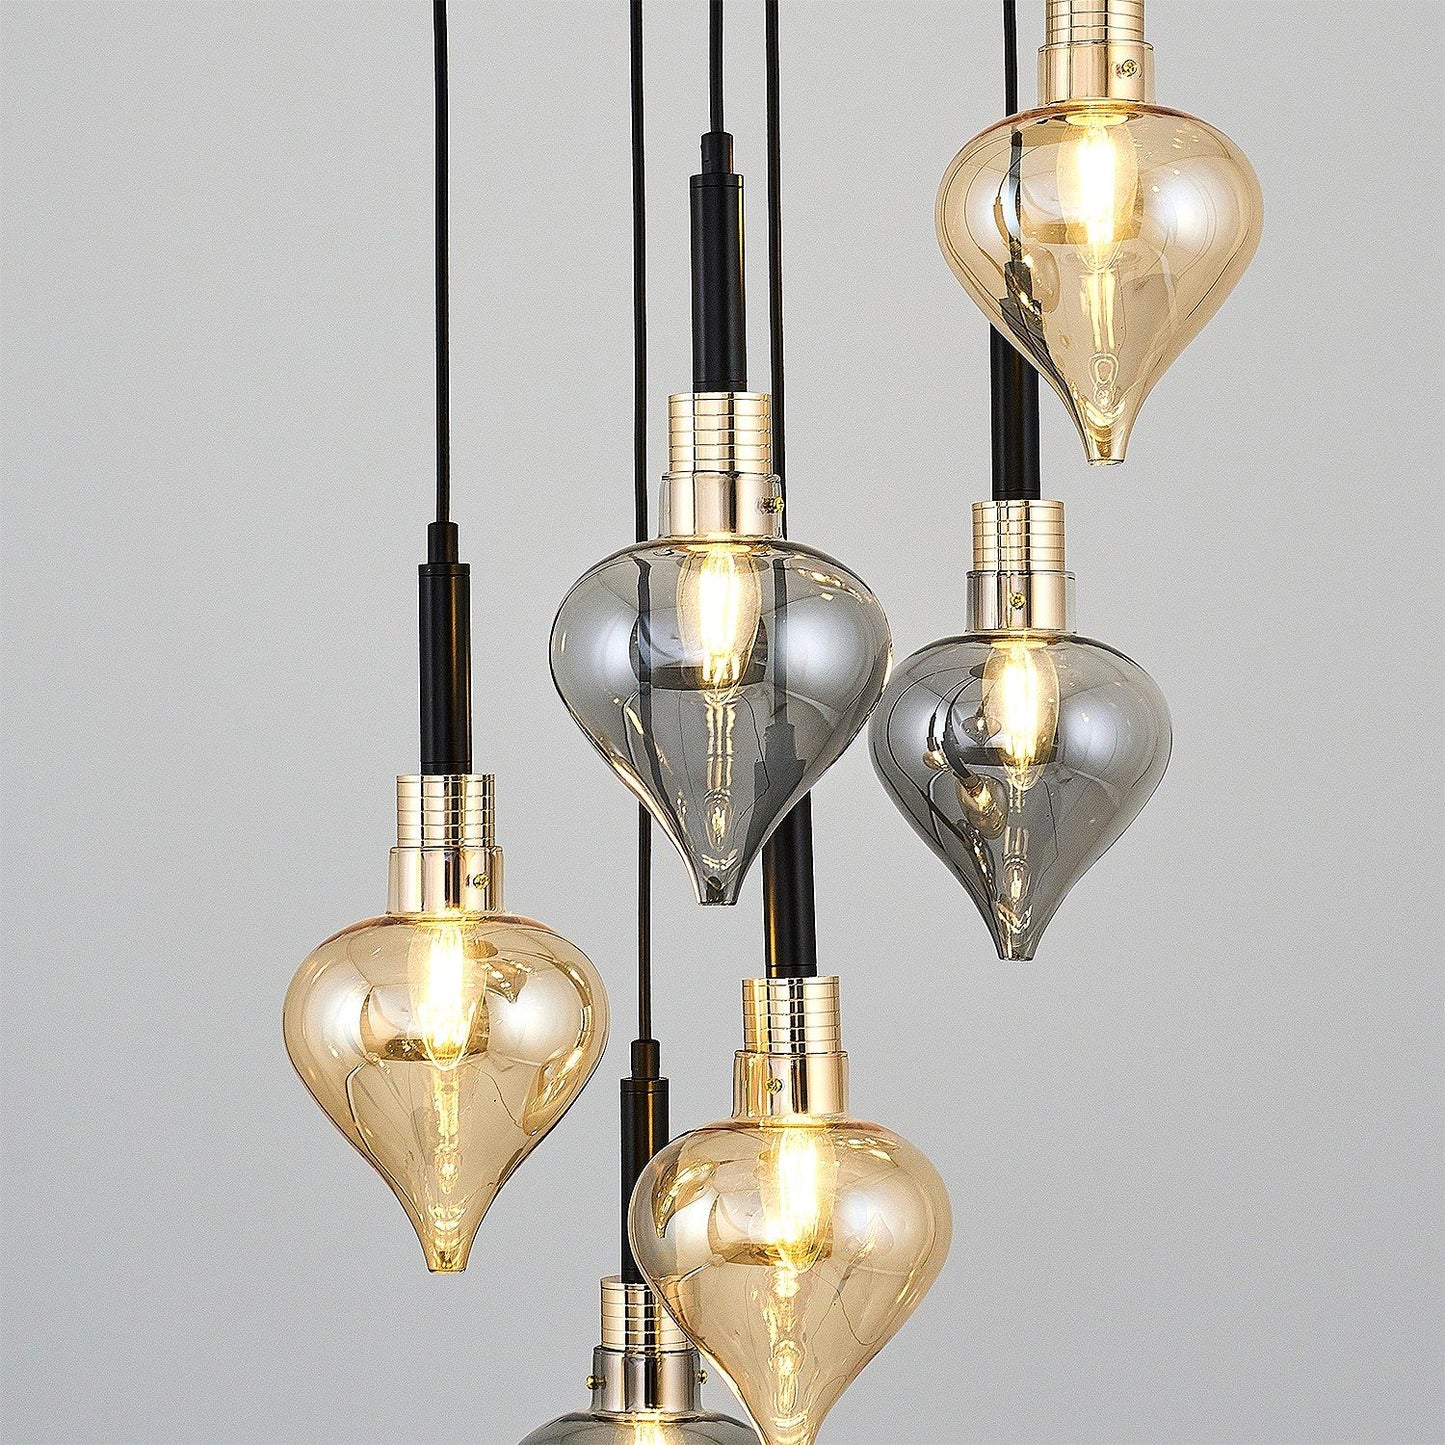 2801-6A-28 - Chandelier